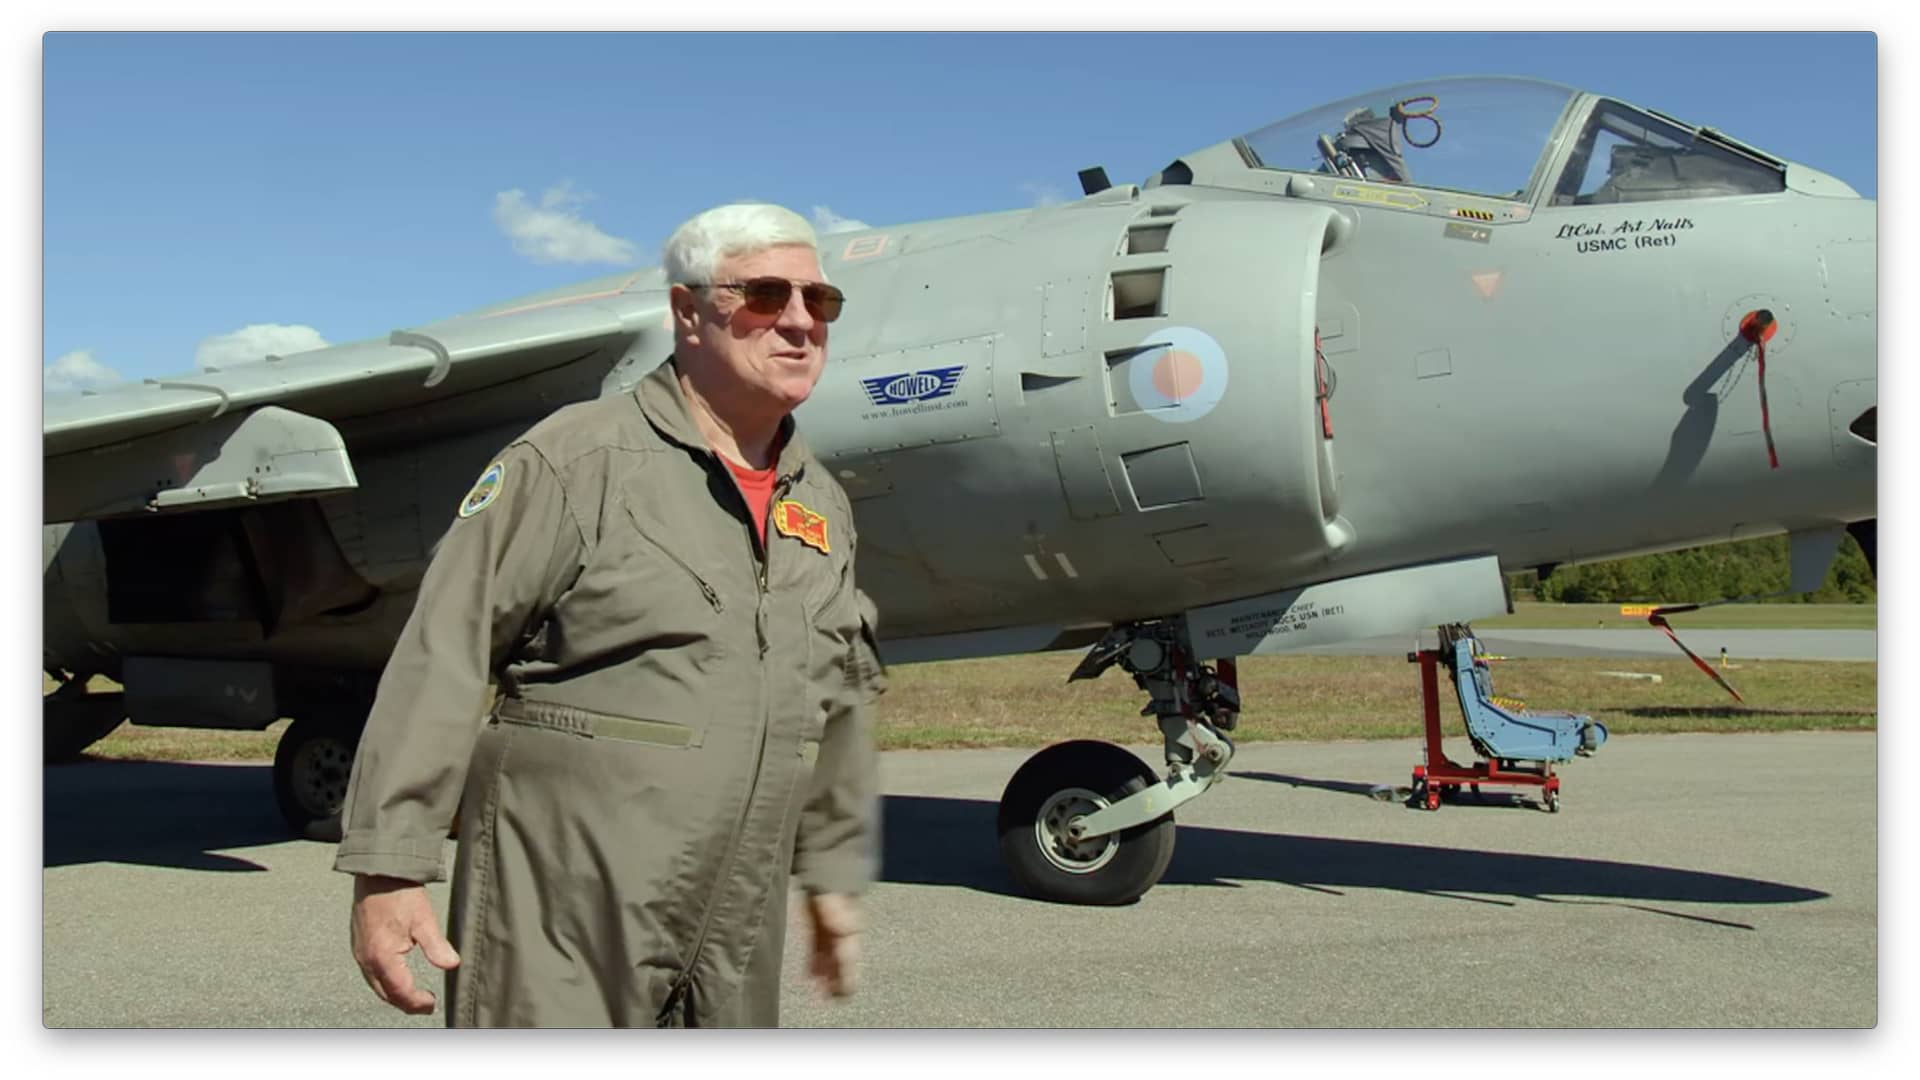 Retired Marine Lt. Col. Art Nalls with his Sea Harrier.